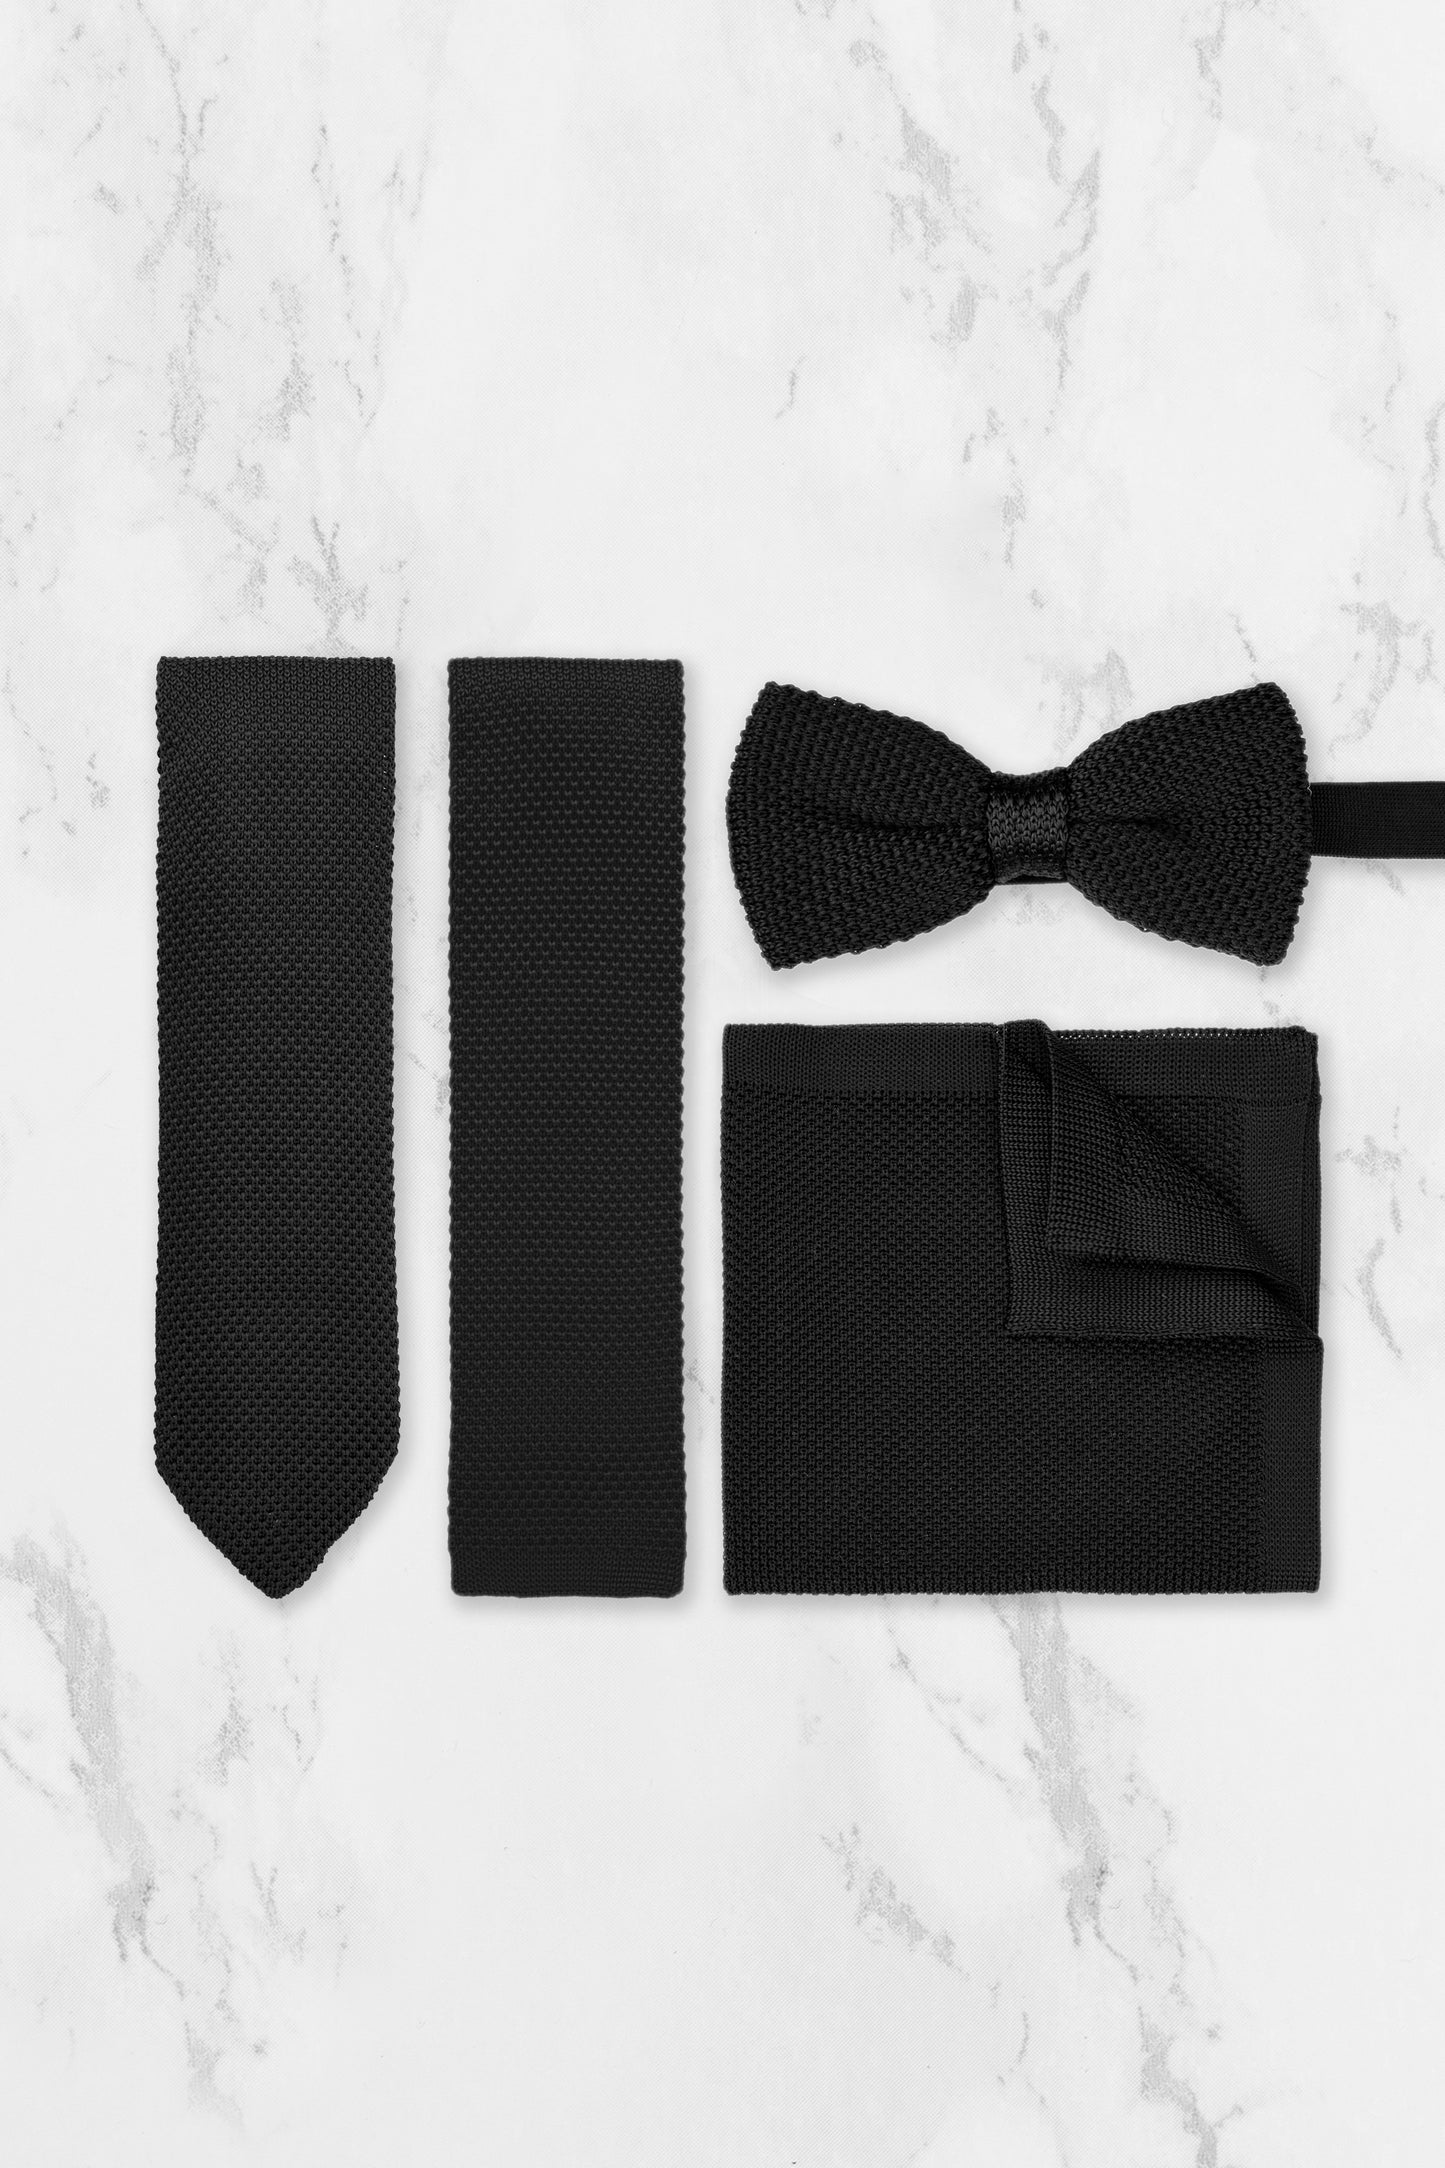 100% Polyester Knitted Bow Tie - Black